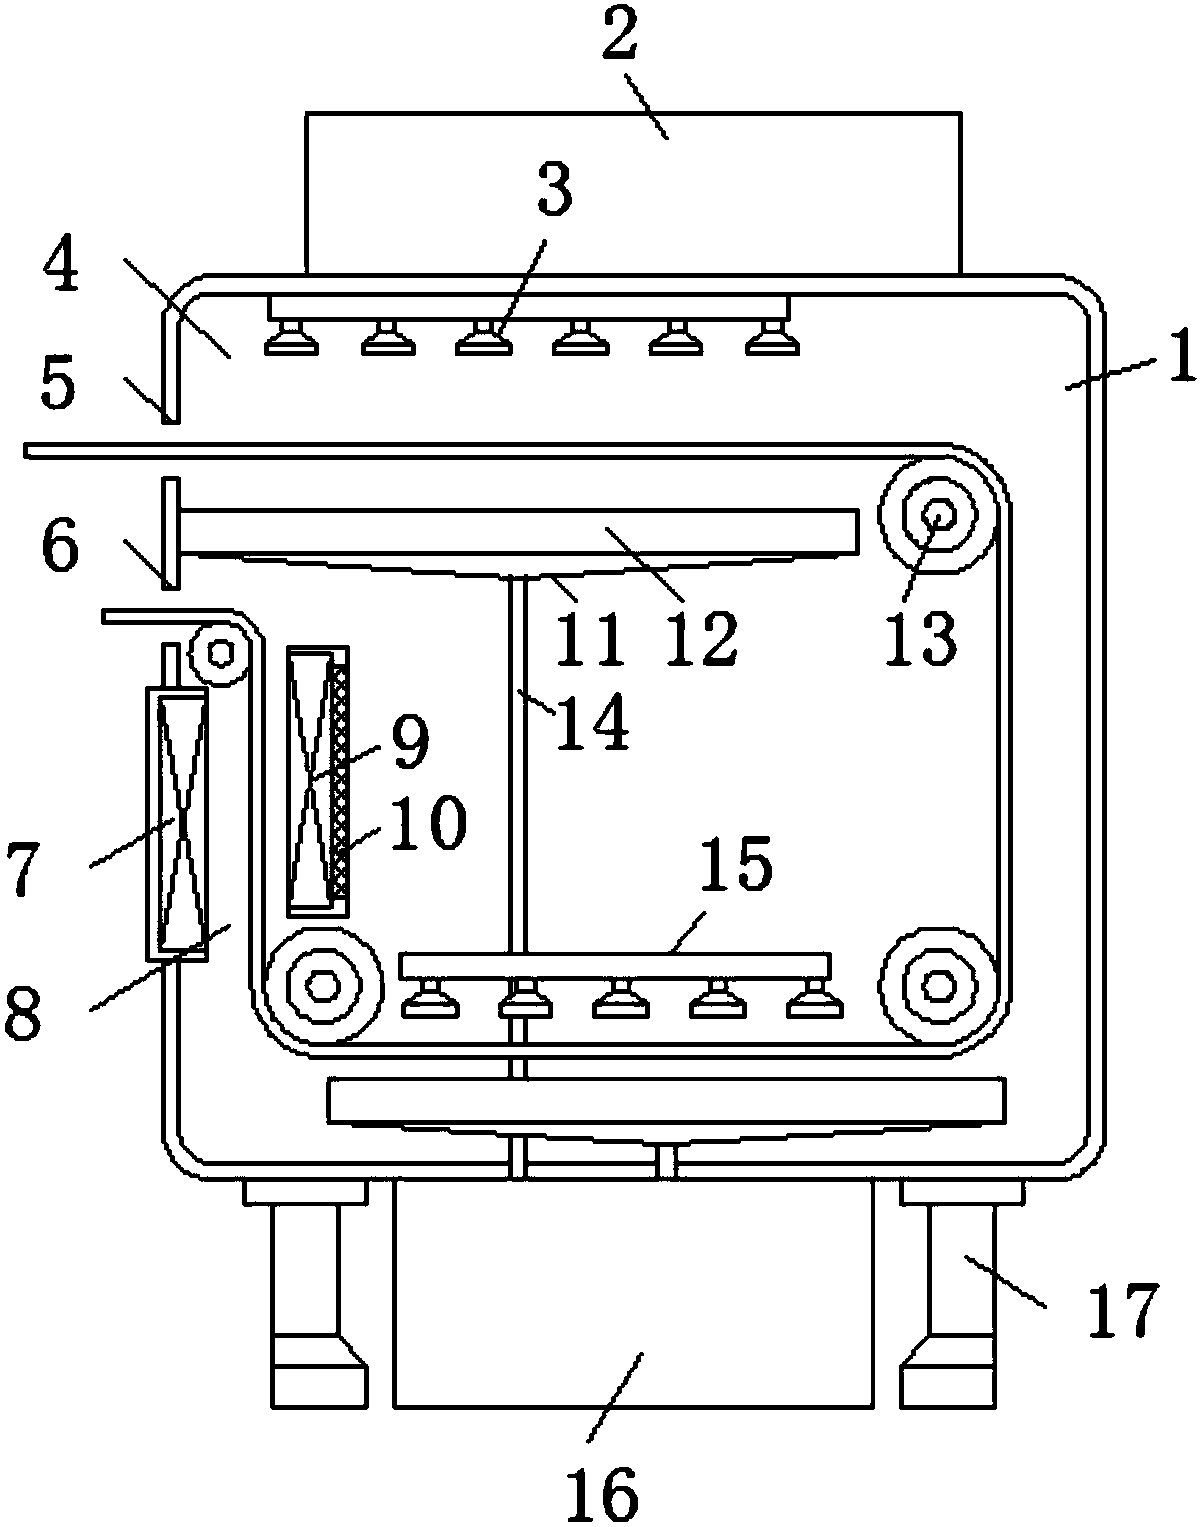 Textile fabric cleaning device for textiles